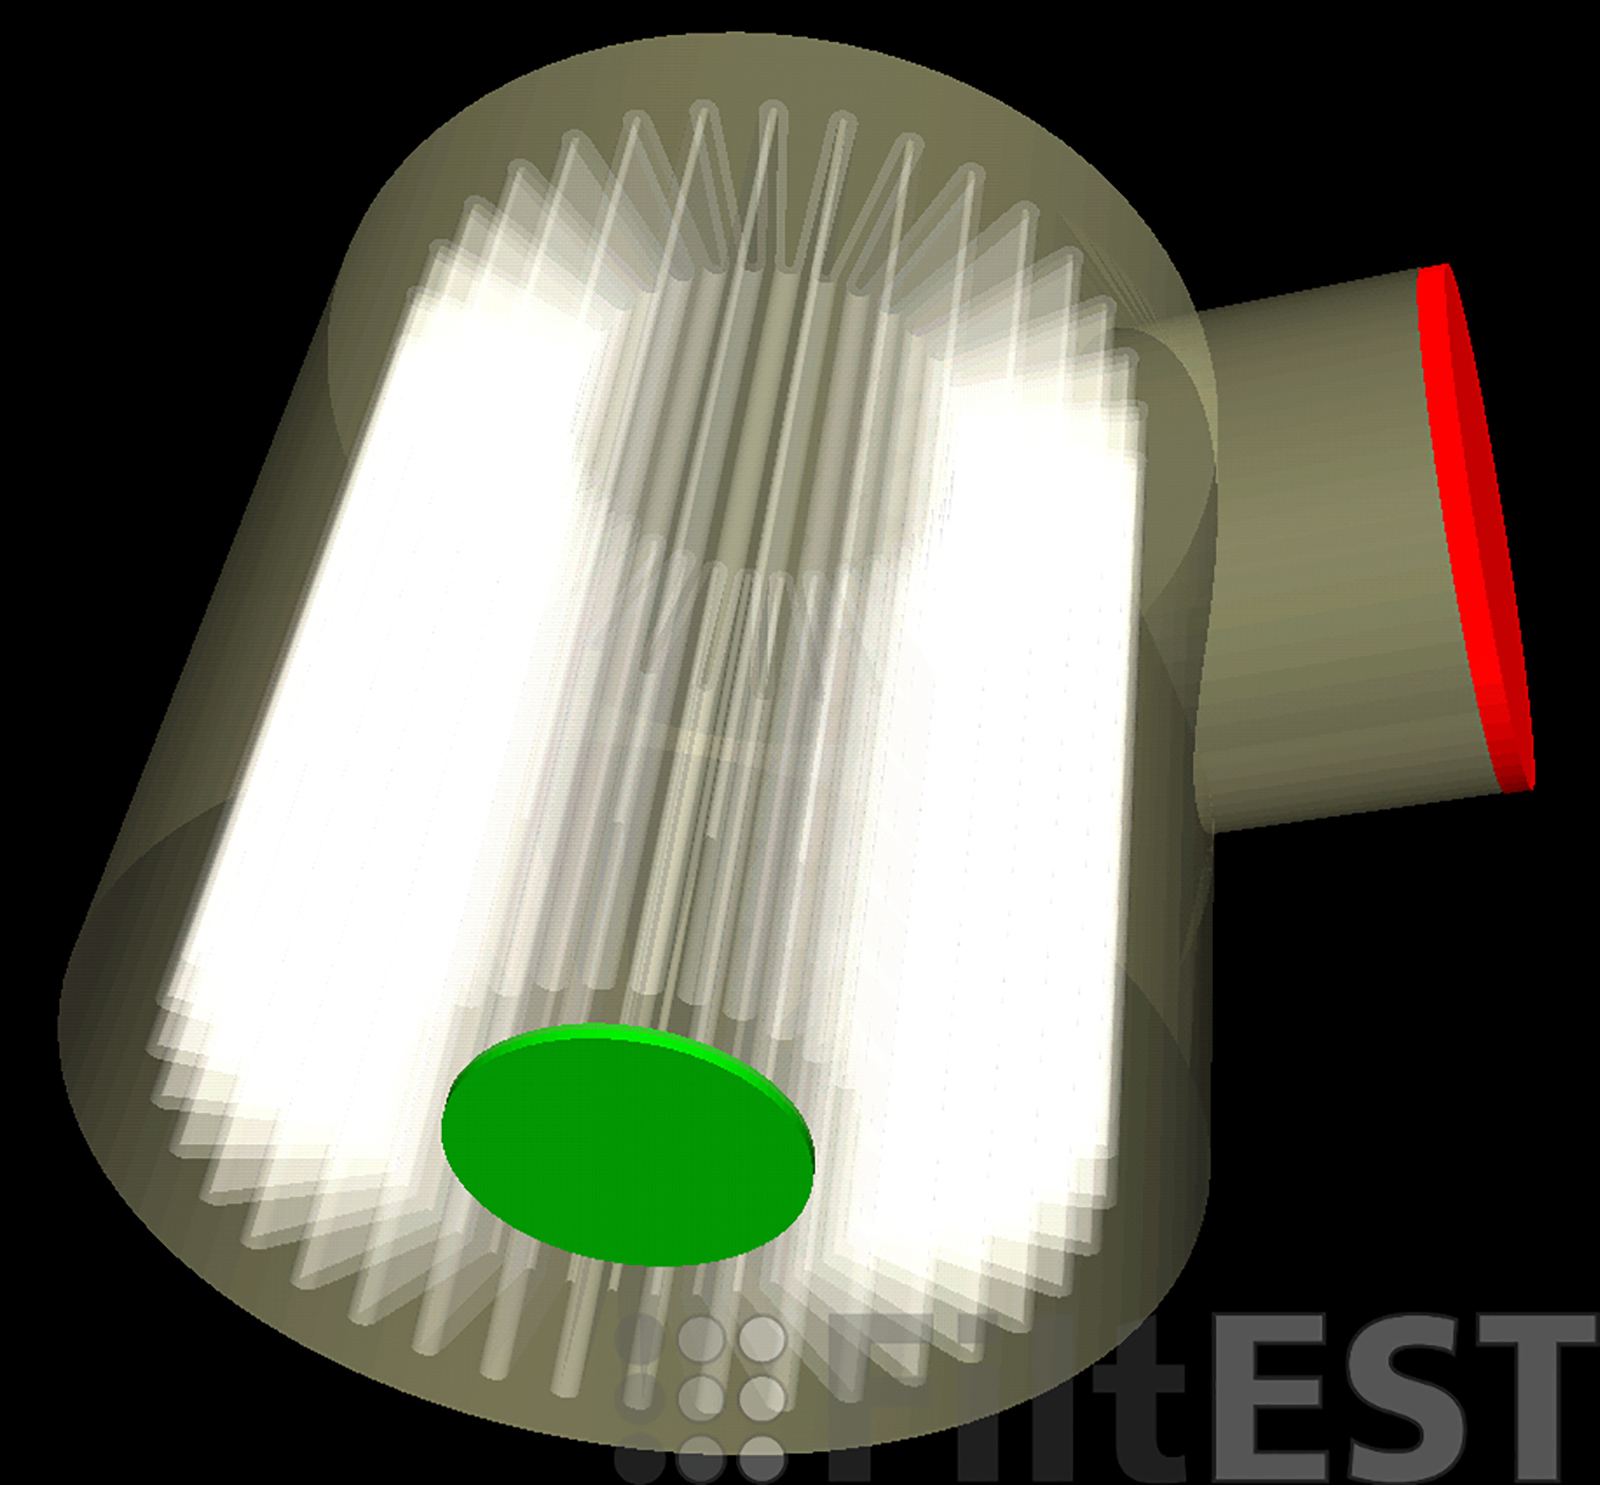 Cylindrical housing with pleated filter medium (star filter), side inlets (red) and central outlet (green).